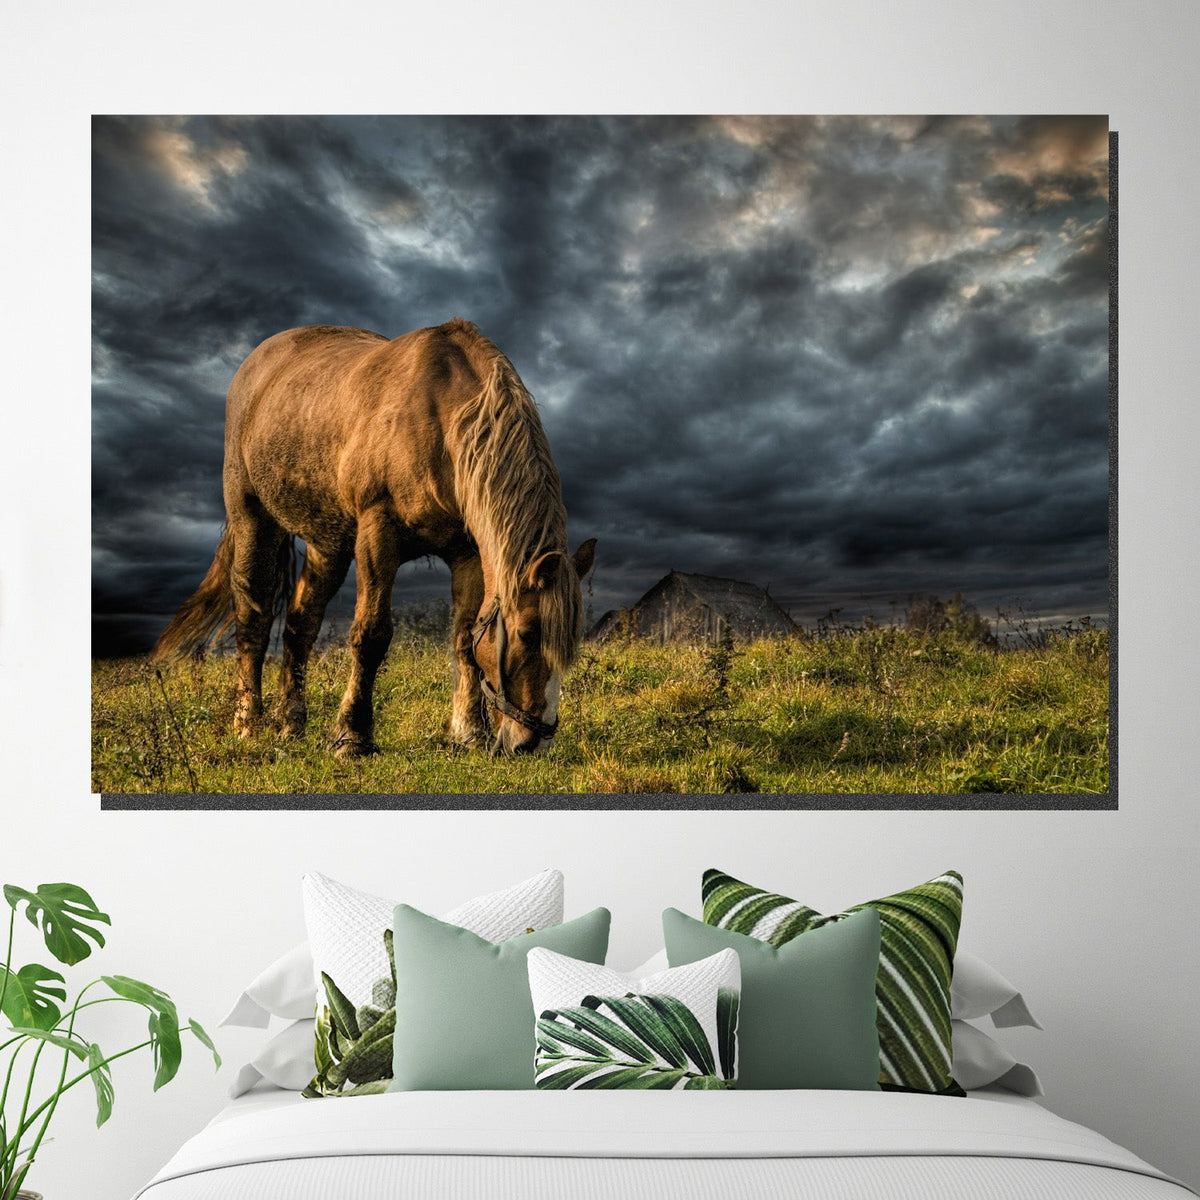 https://cdn.shopify.com/s/files/1/0387/9986/8044/products/ClydesdaleHorseCanvasArtprintStretched-1.jpg